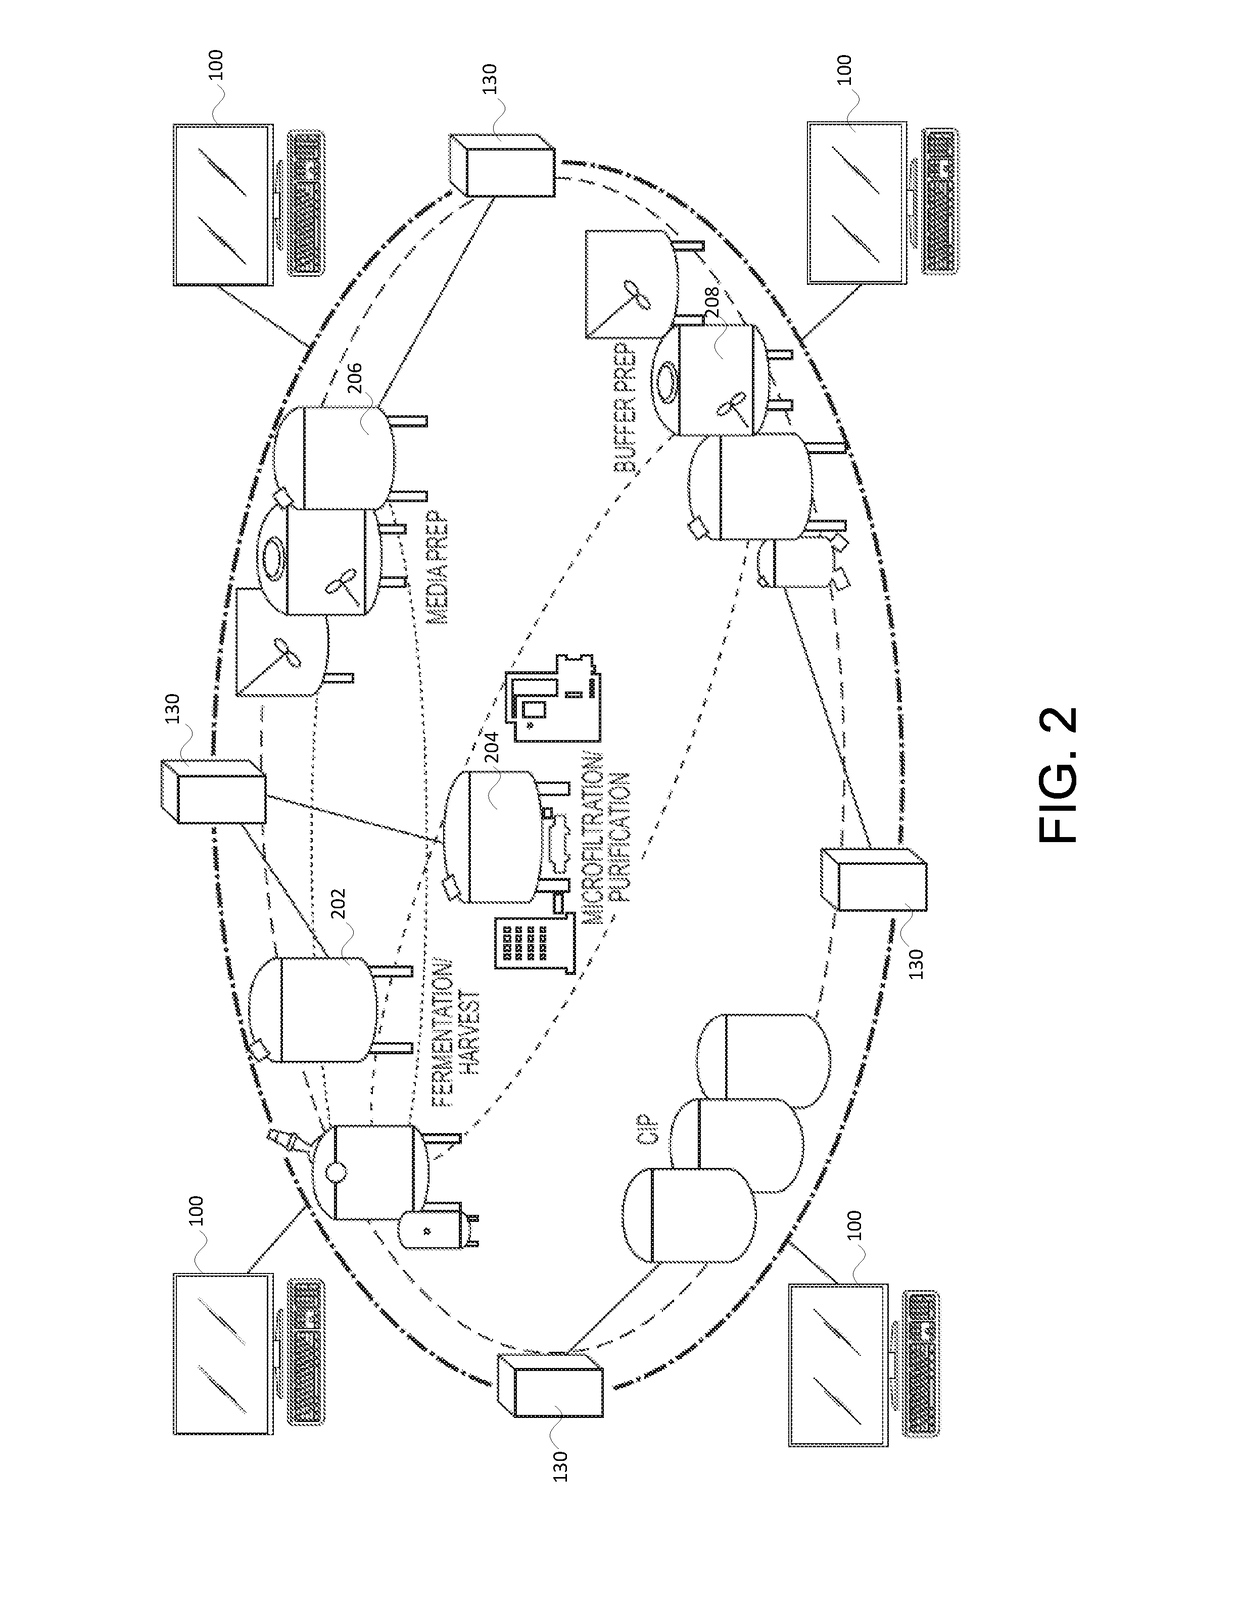 System and Method for Regulating Cell Culture Based Production of Biologics